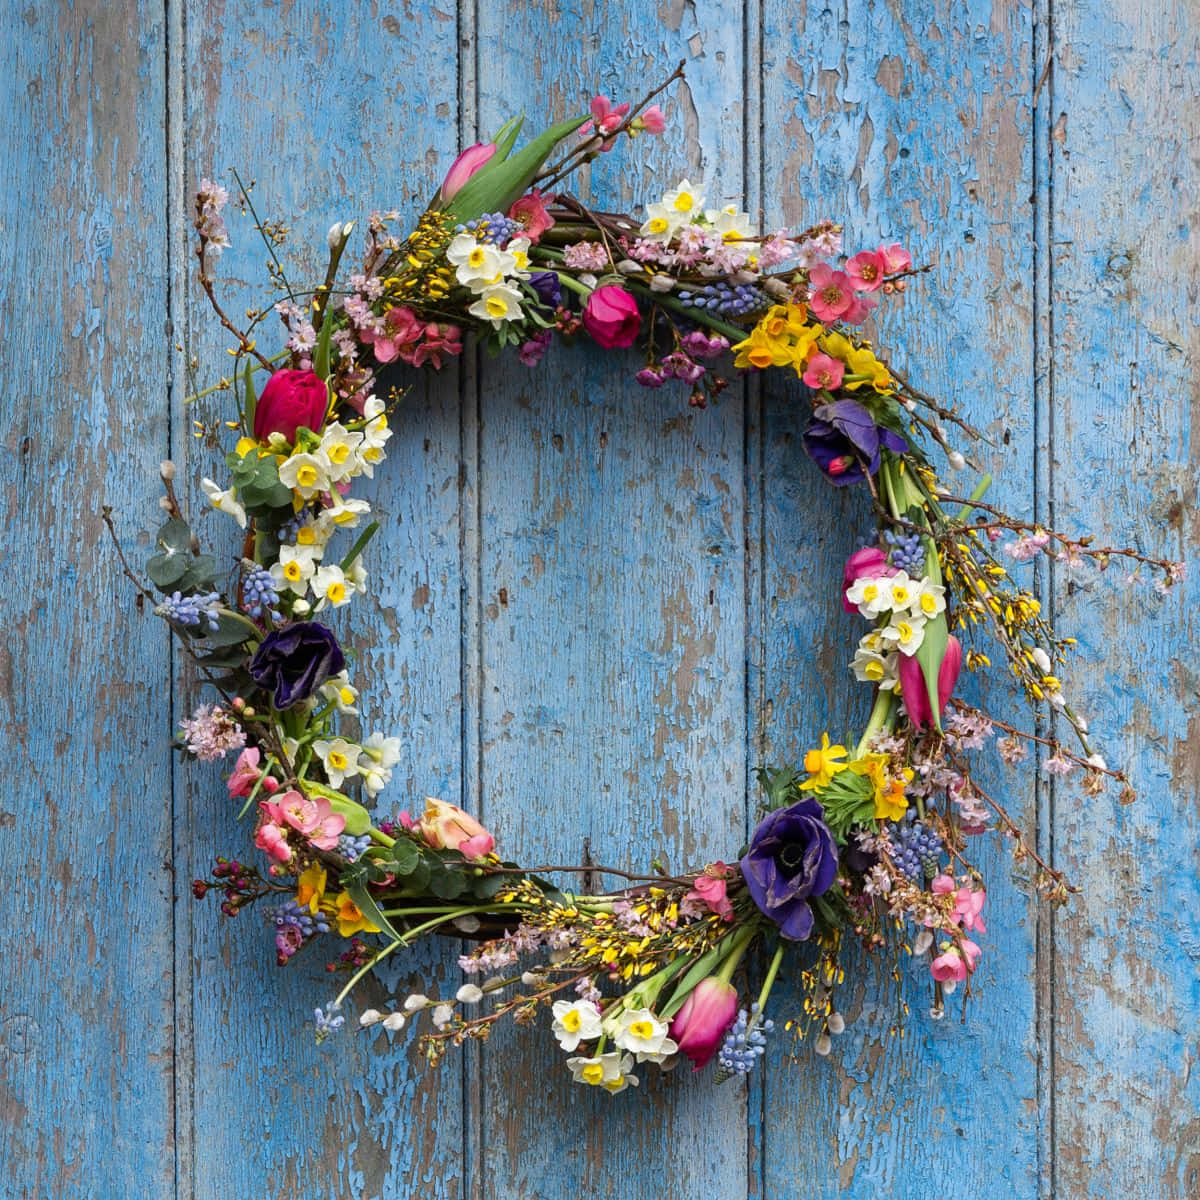 Colorful Spring Wreath with Vibrant Flowers on Wooden Door Wallpaper